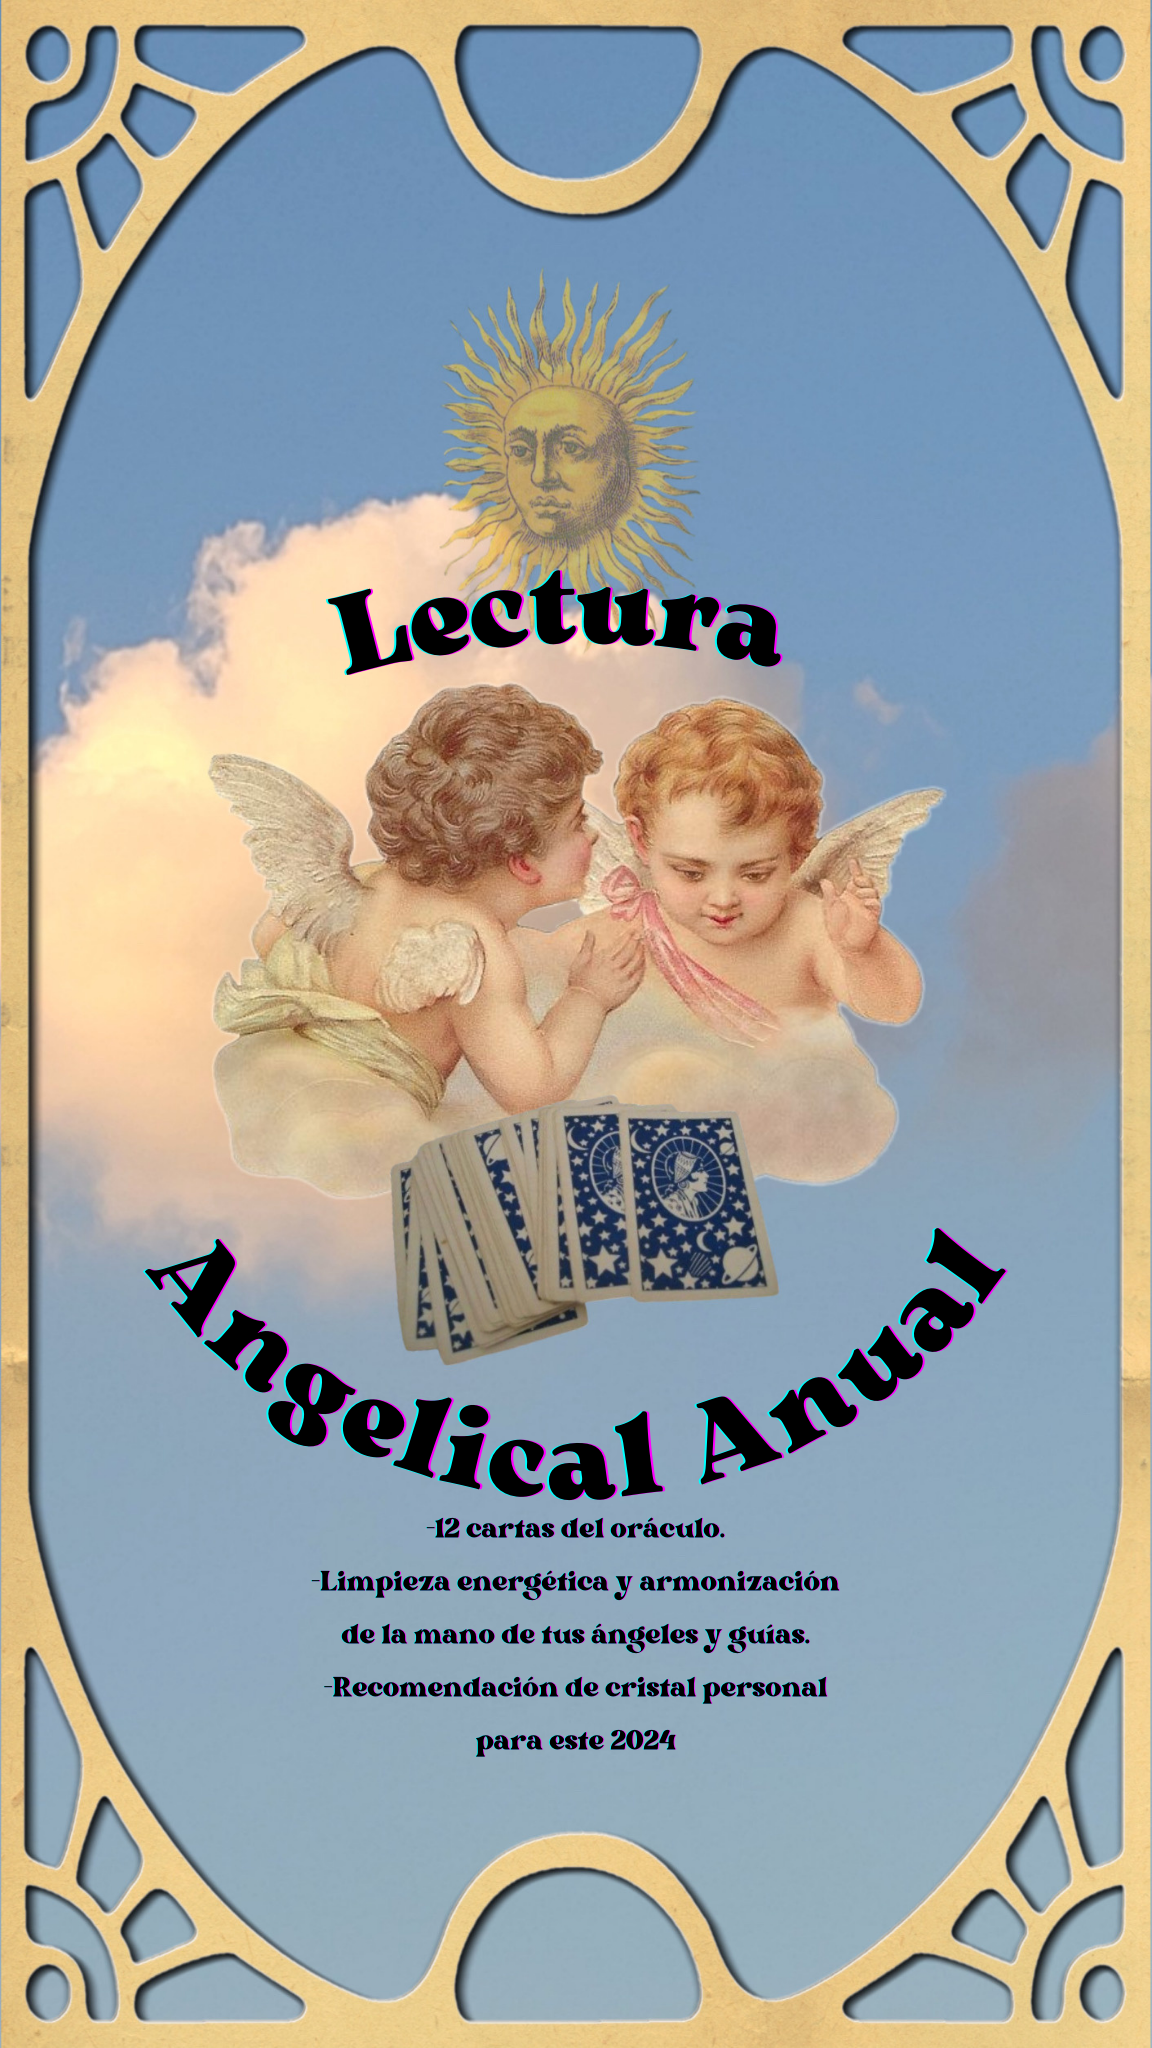 Annual Angelic Reading